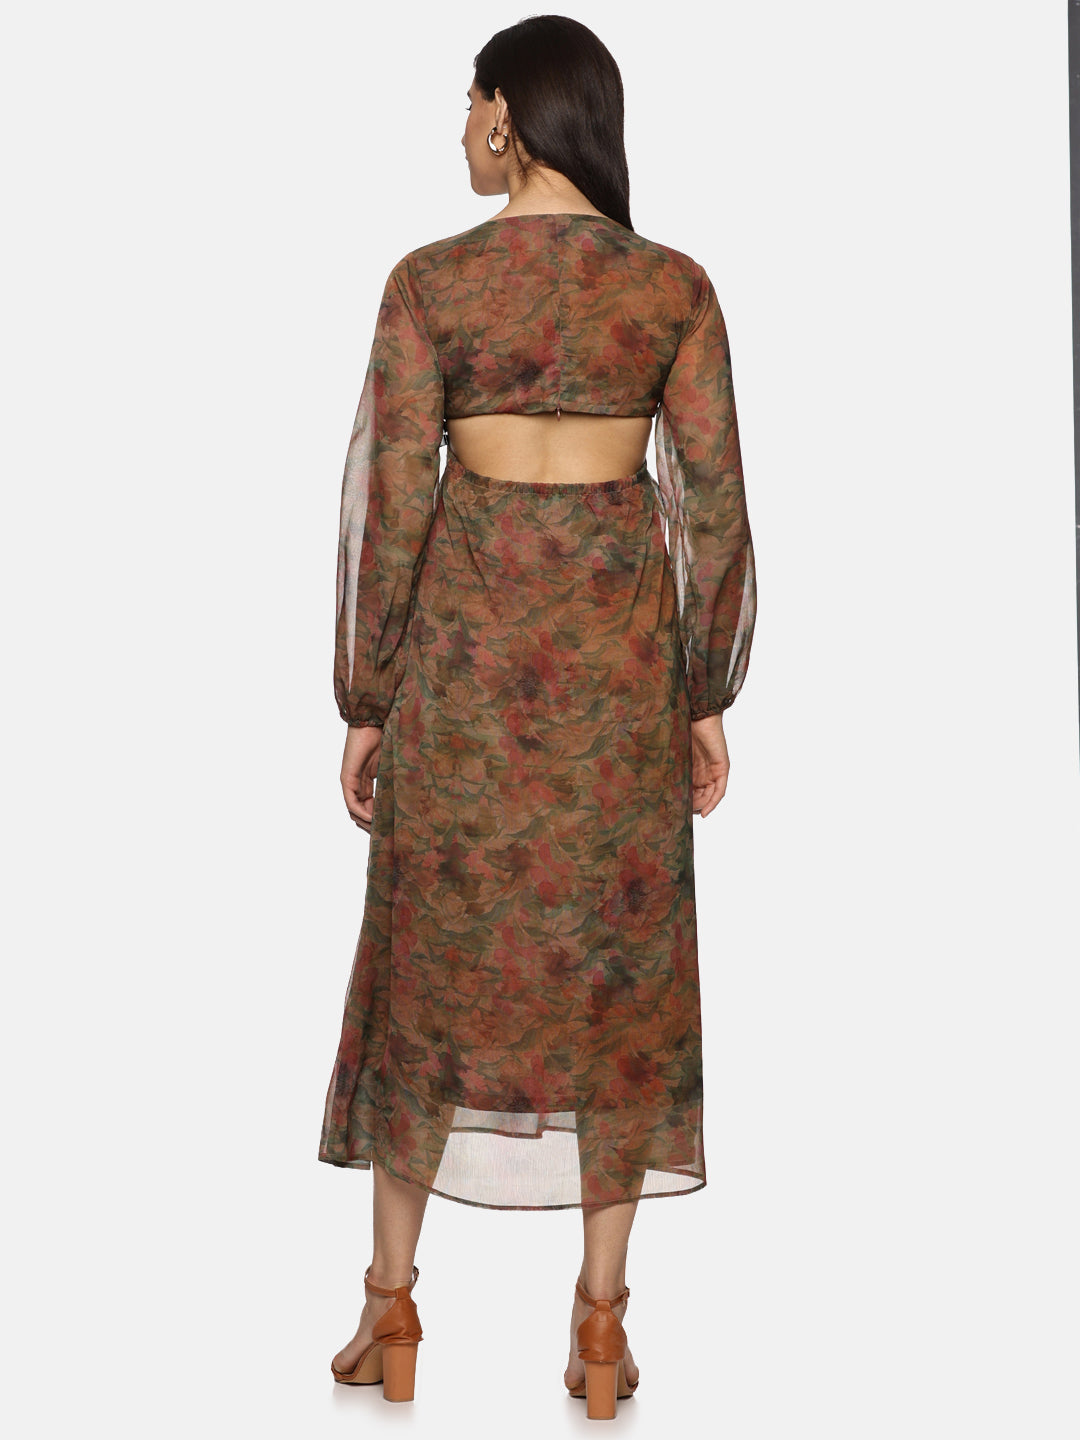 Buy Brown Printed Floral Chiffon Fabric | Cut Out Midaxi Dress Online In India